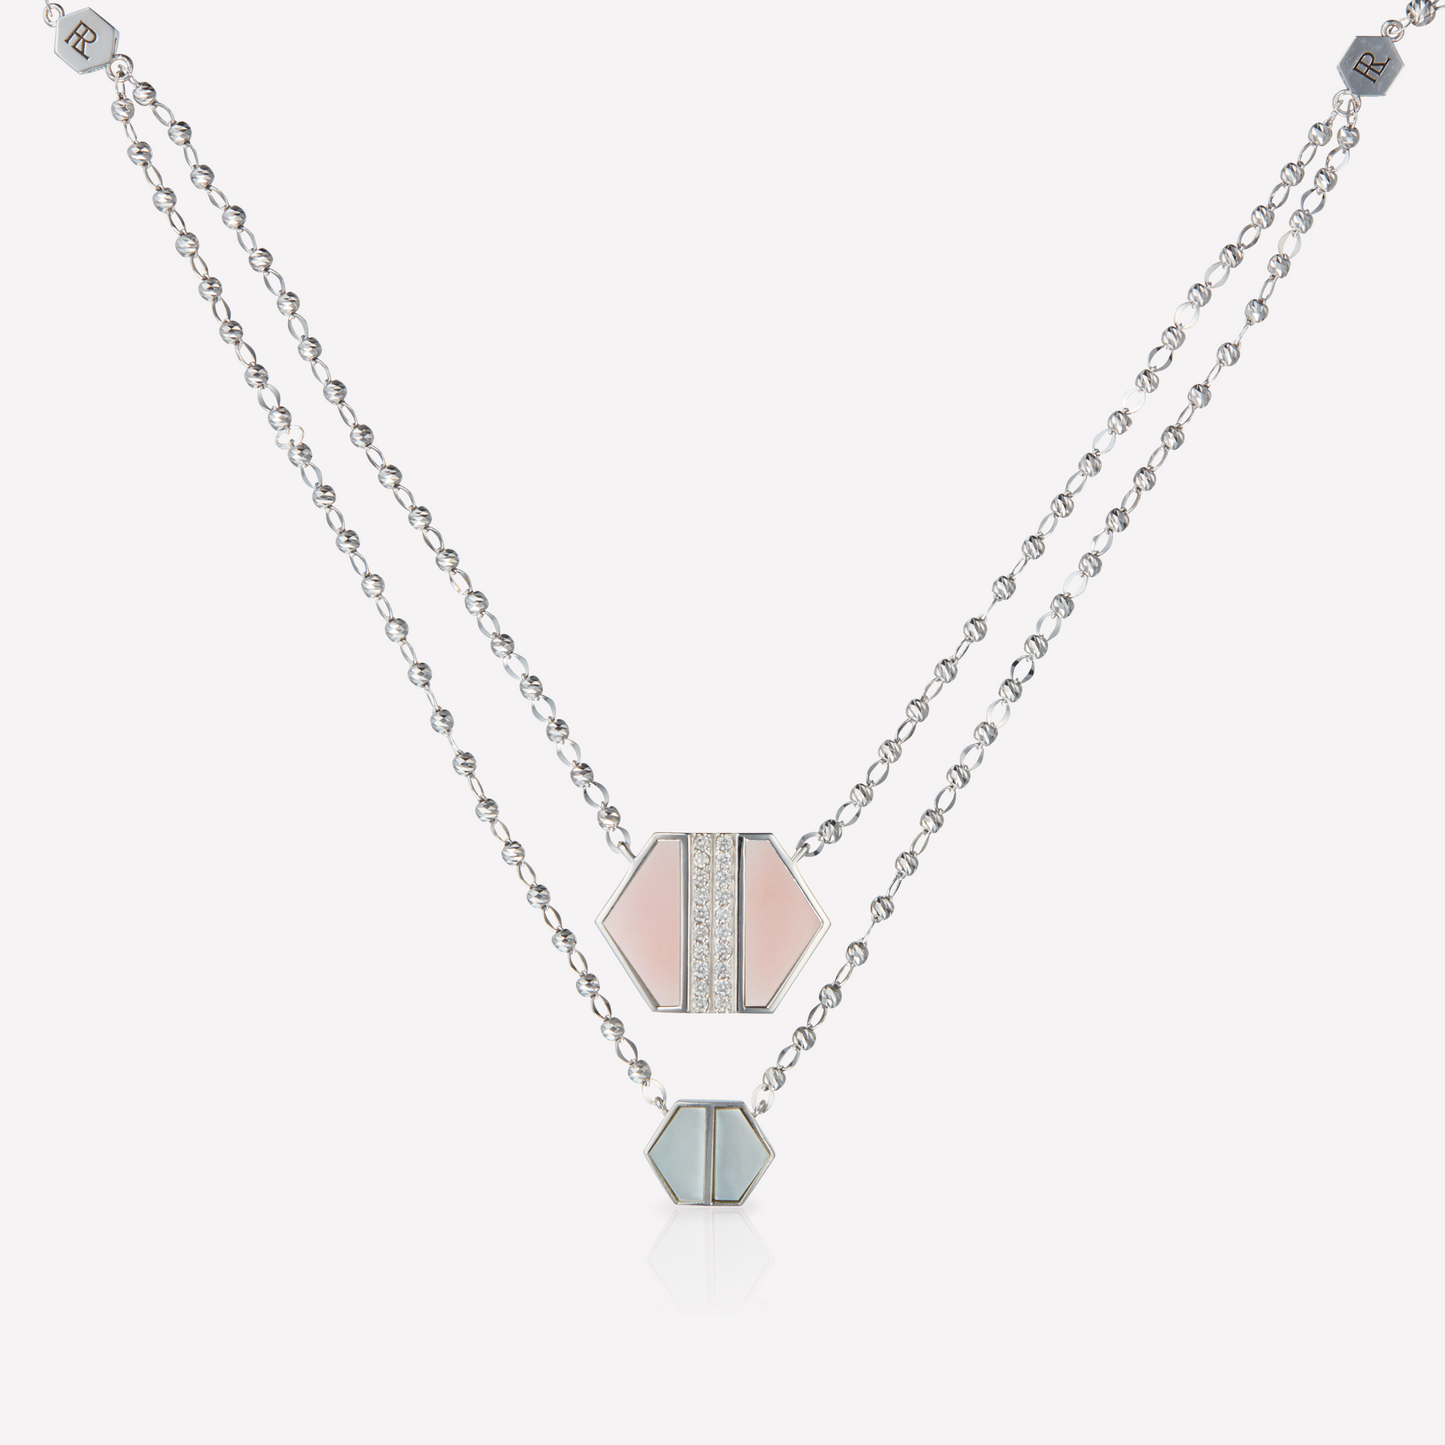 VOID Filled By You Necklace, Large, Pink Nacre, Diamond L